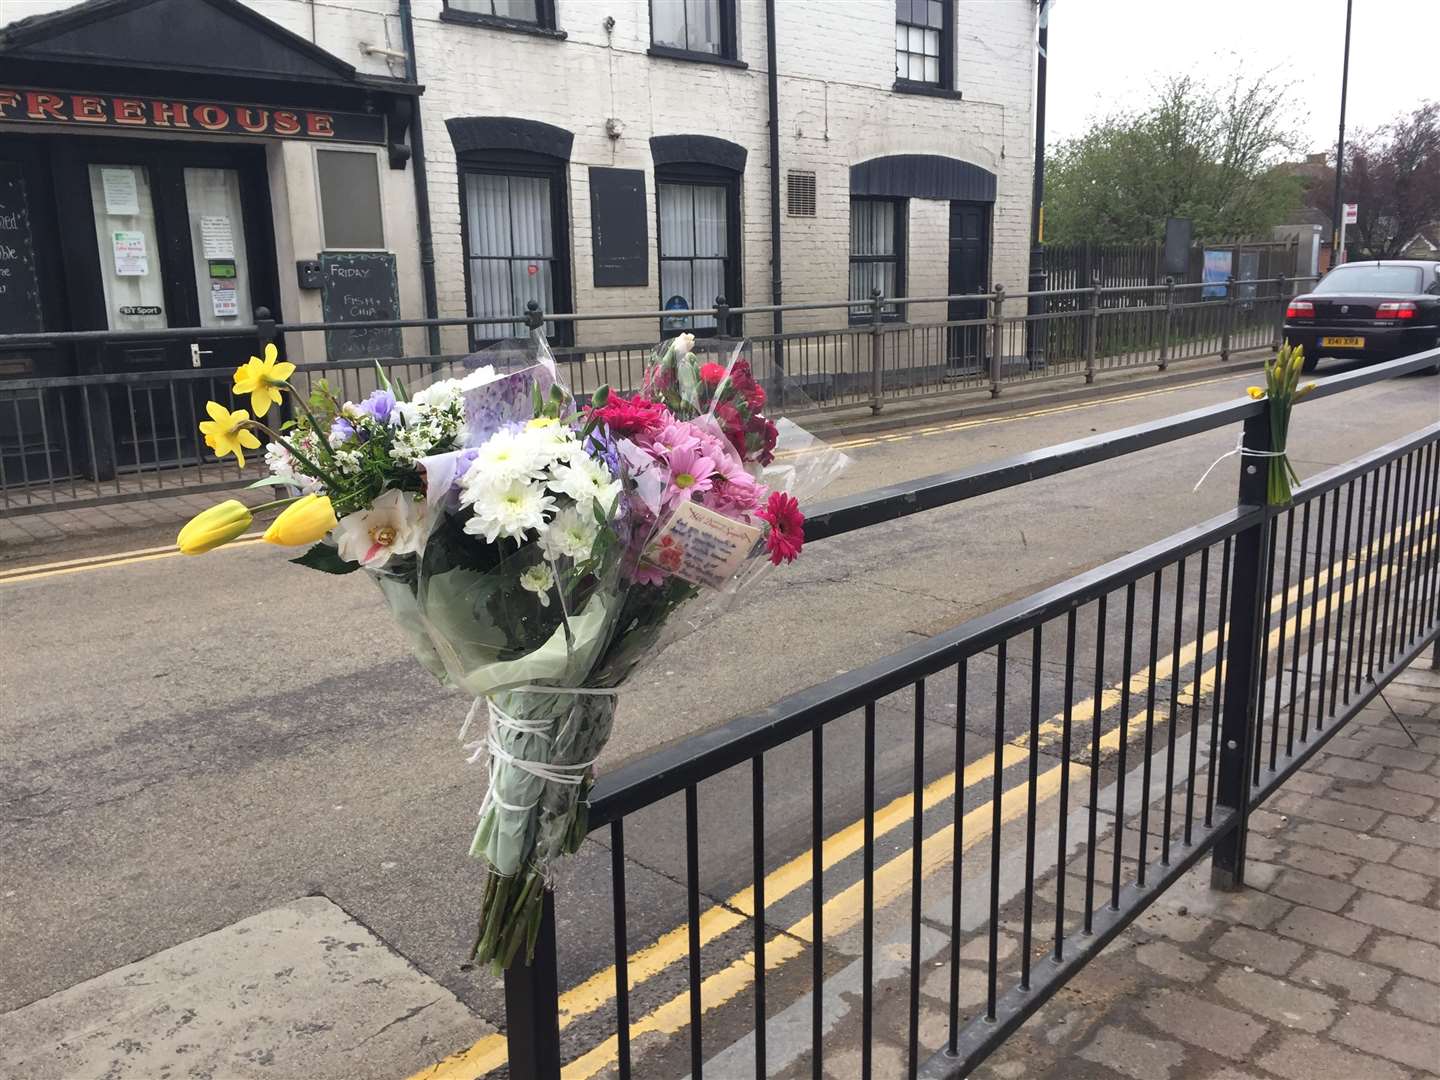 Flowers have been left at Newington High Street after the death of pensioner Rod Gates who was hit by a lorry on Thursday, April 5